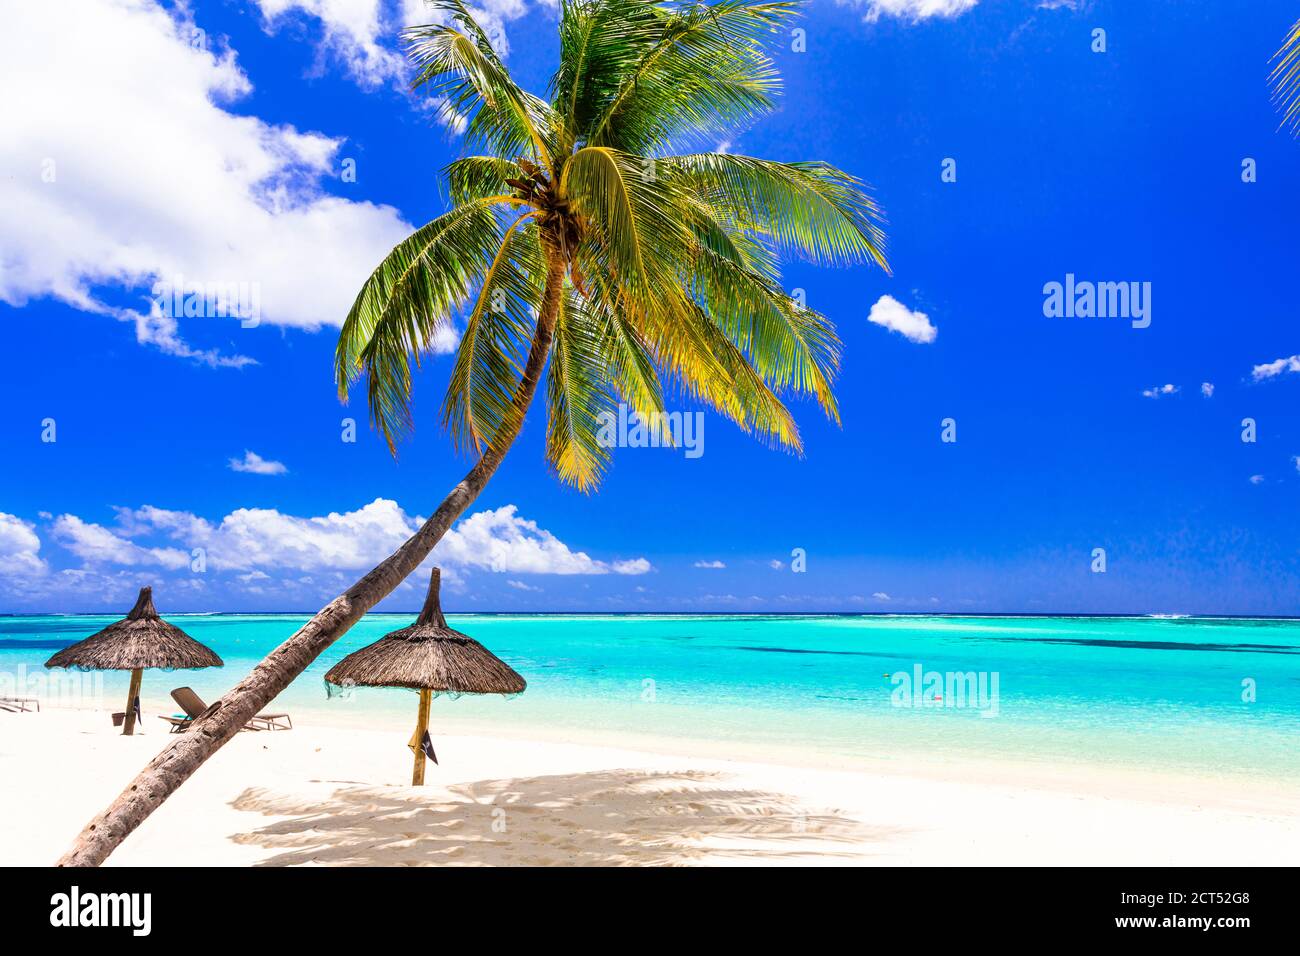 Perfect tropical beach scenery. Palm trees over turquoise sea and white sand Stock Photo